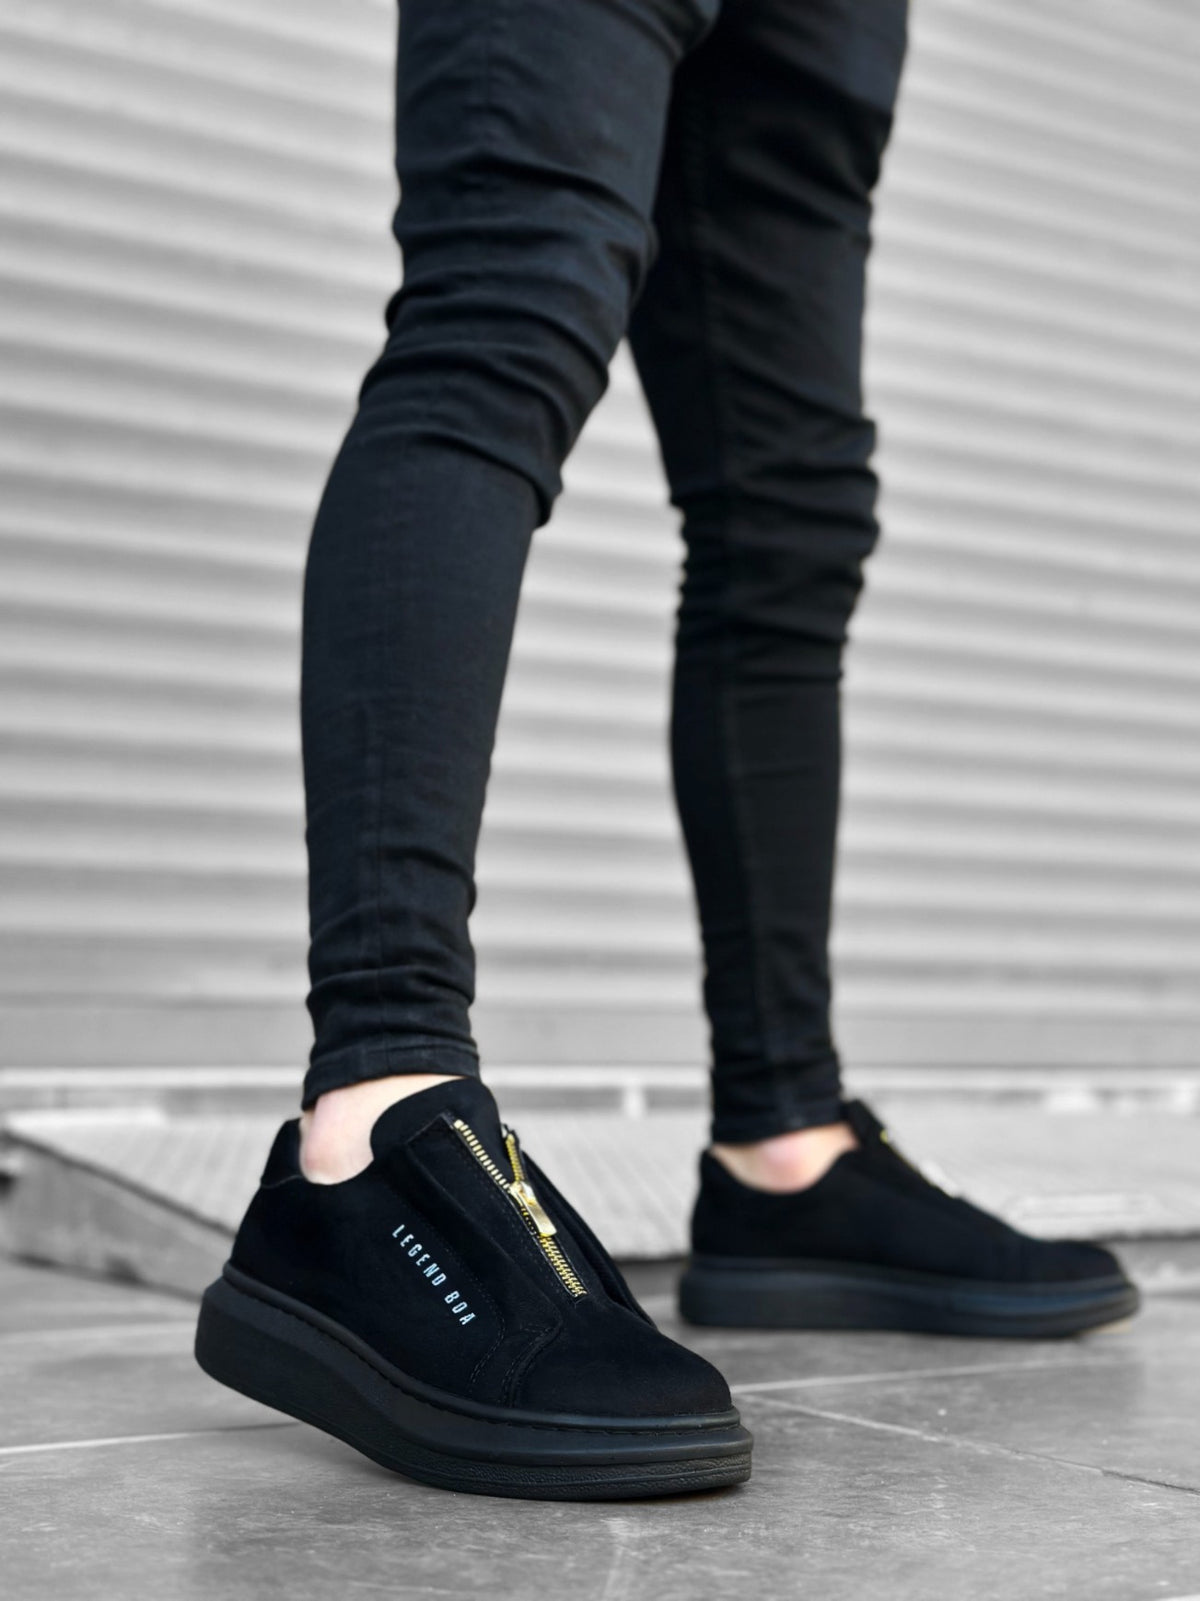 BA0310 BOA Thick Suede High Sole Zipper Black Black Men's Sneakers Shoes - STREETMODE™